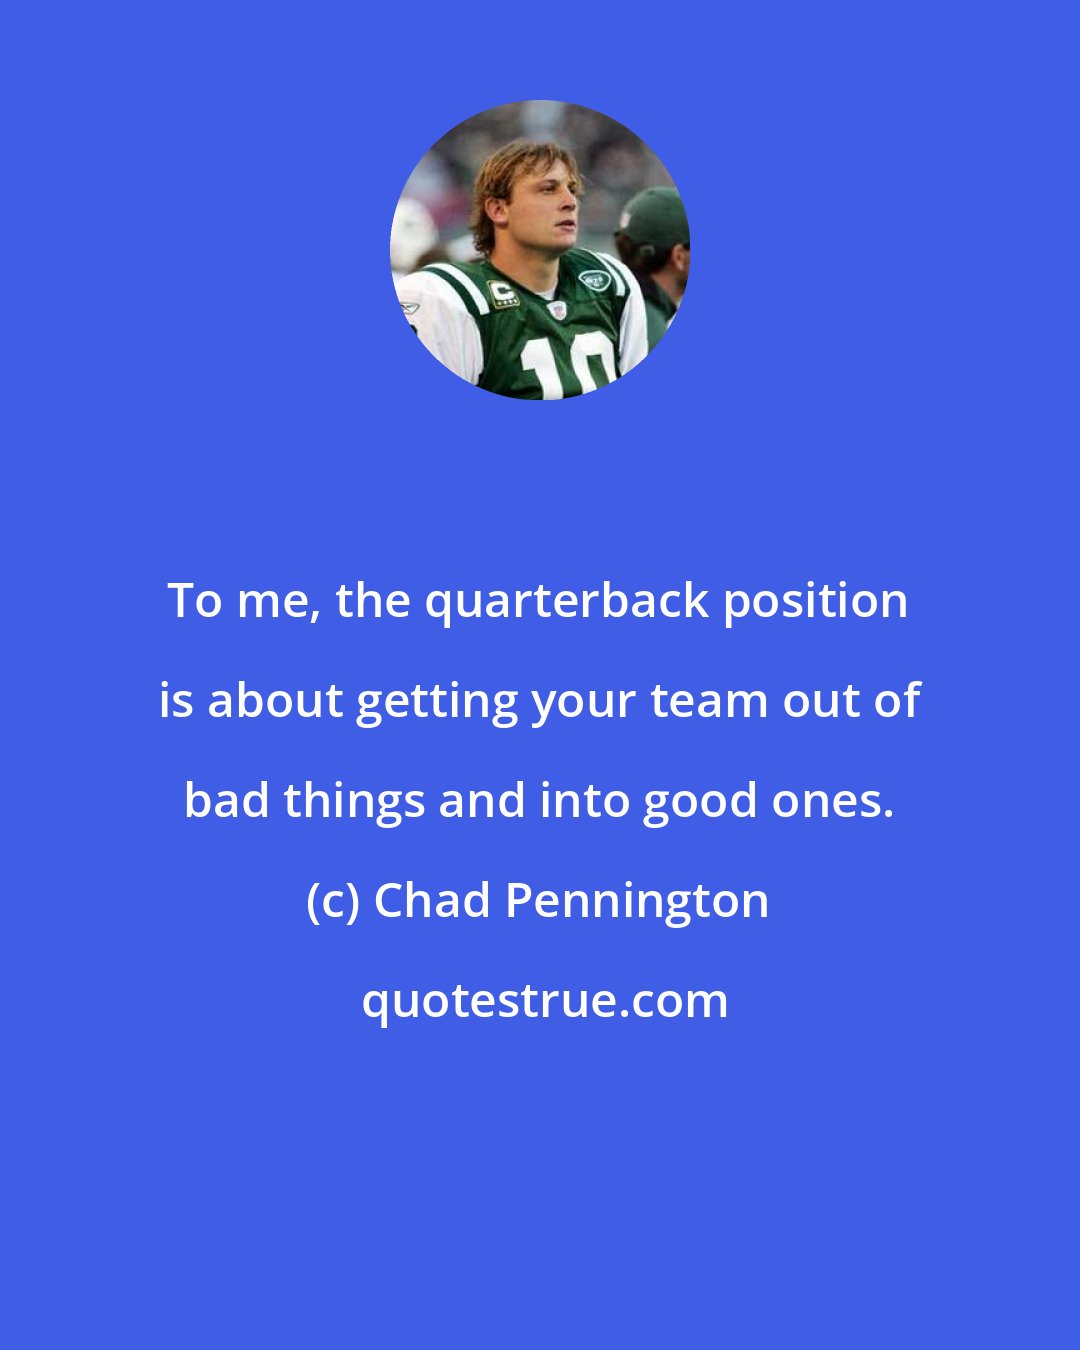 Chad Pennington: To me, the quarterback position is about getting your team out of bad things and into good ones.